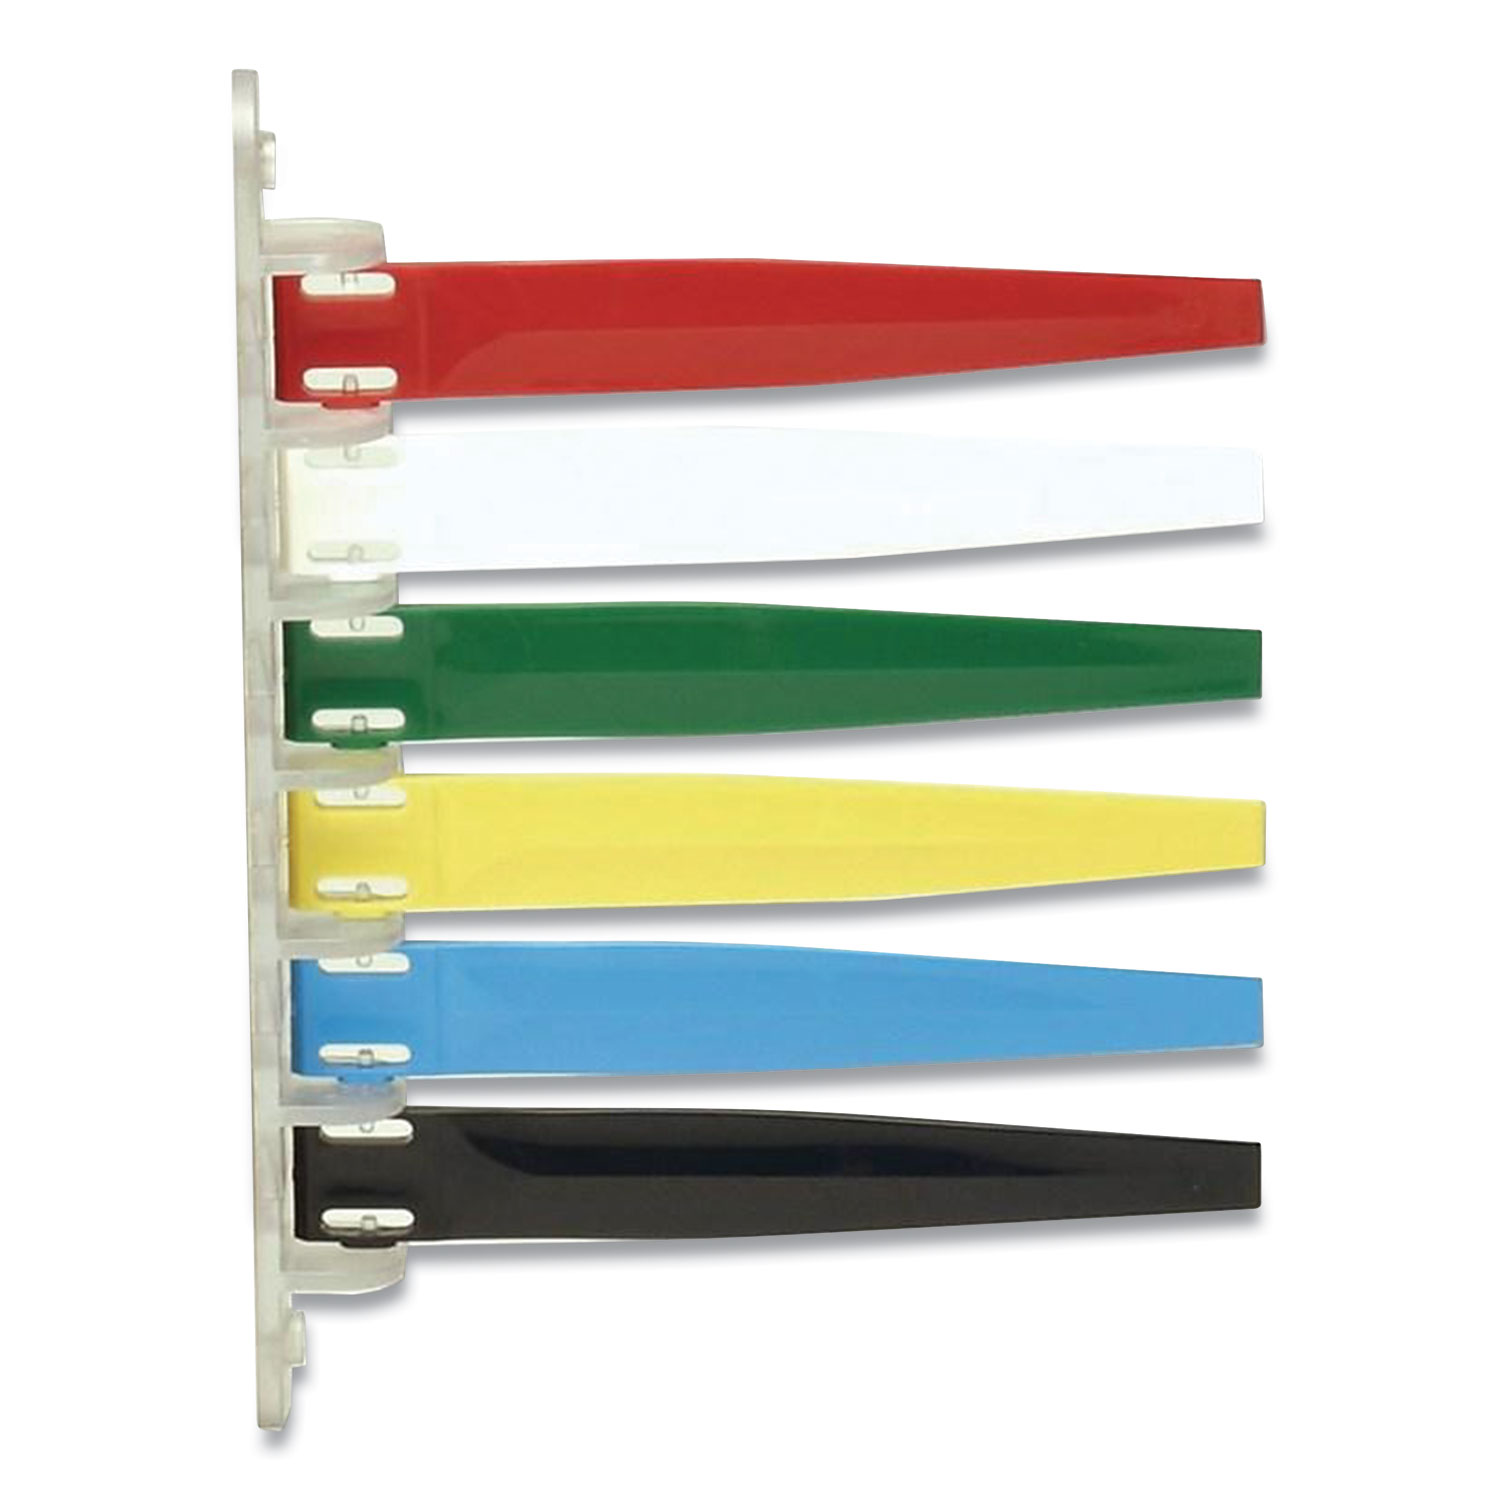  Unimed I6PF169436 Primary Exam Room Flags, Six Flags, Assorted Colors (UMI738848) 